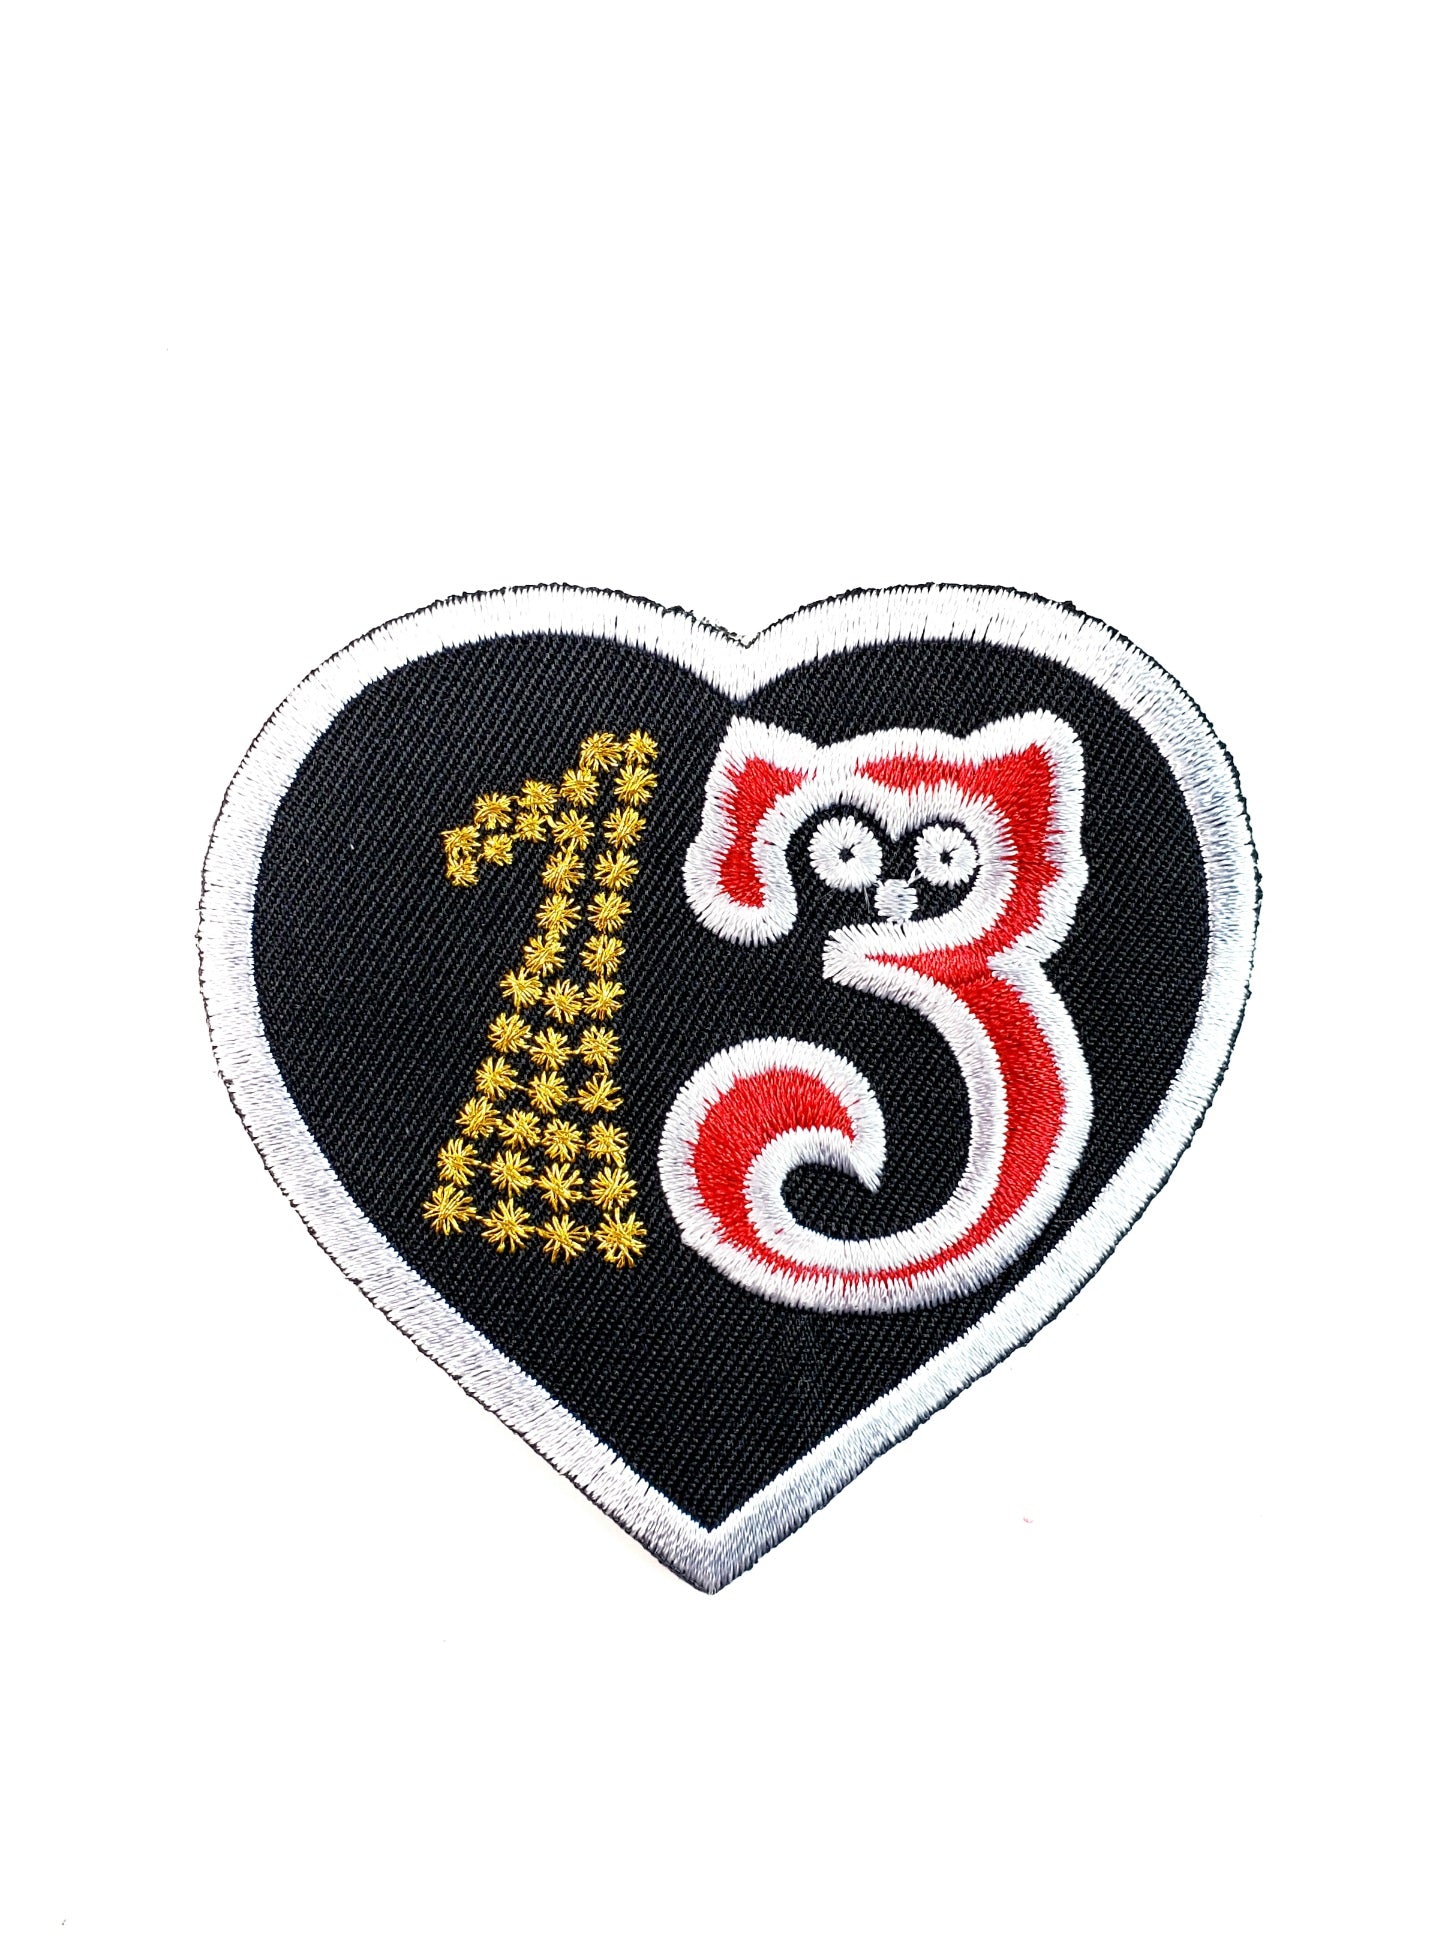 black canvas twill heart-shaped embroidered "13" patch where the silhouette of a cat forms a red, white, and black number 3 while the number 1 is formed by tiny gold stars made of metallic thread